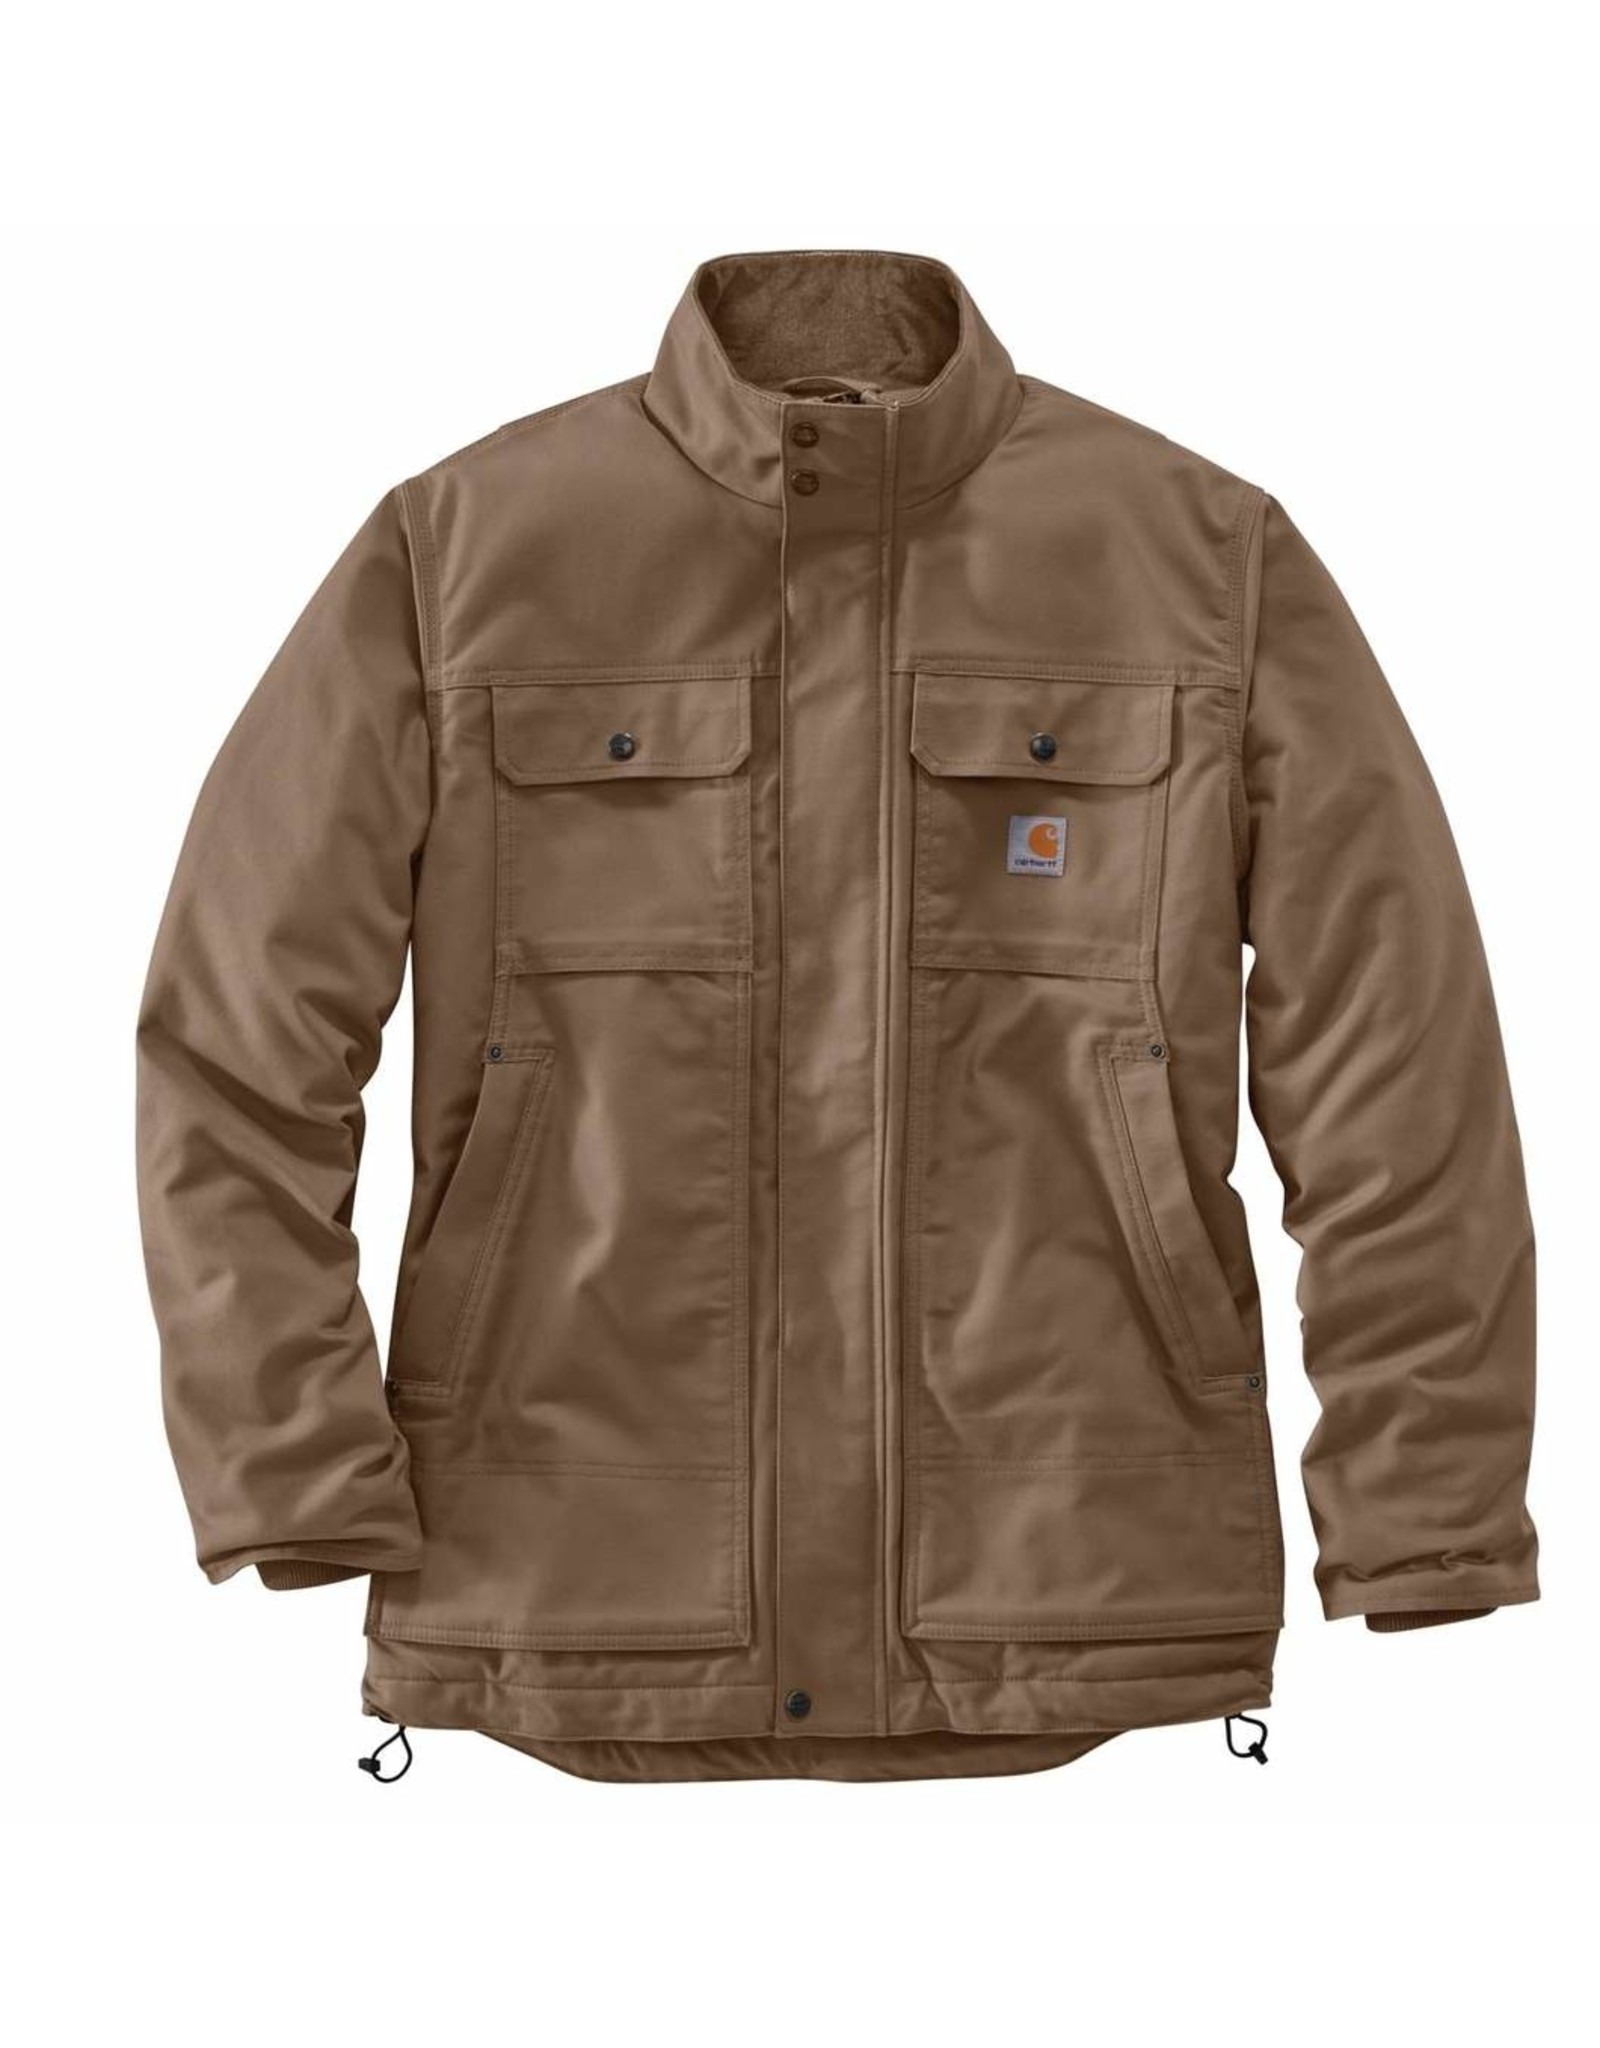 Carhartt Mens Full Swing Canyon Brown 104468-CBR Insulated Jacket